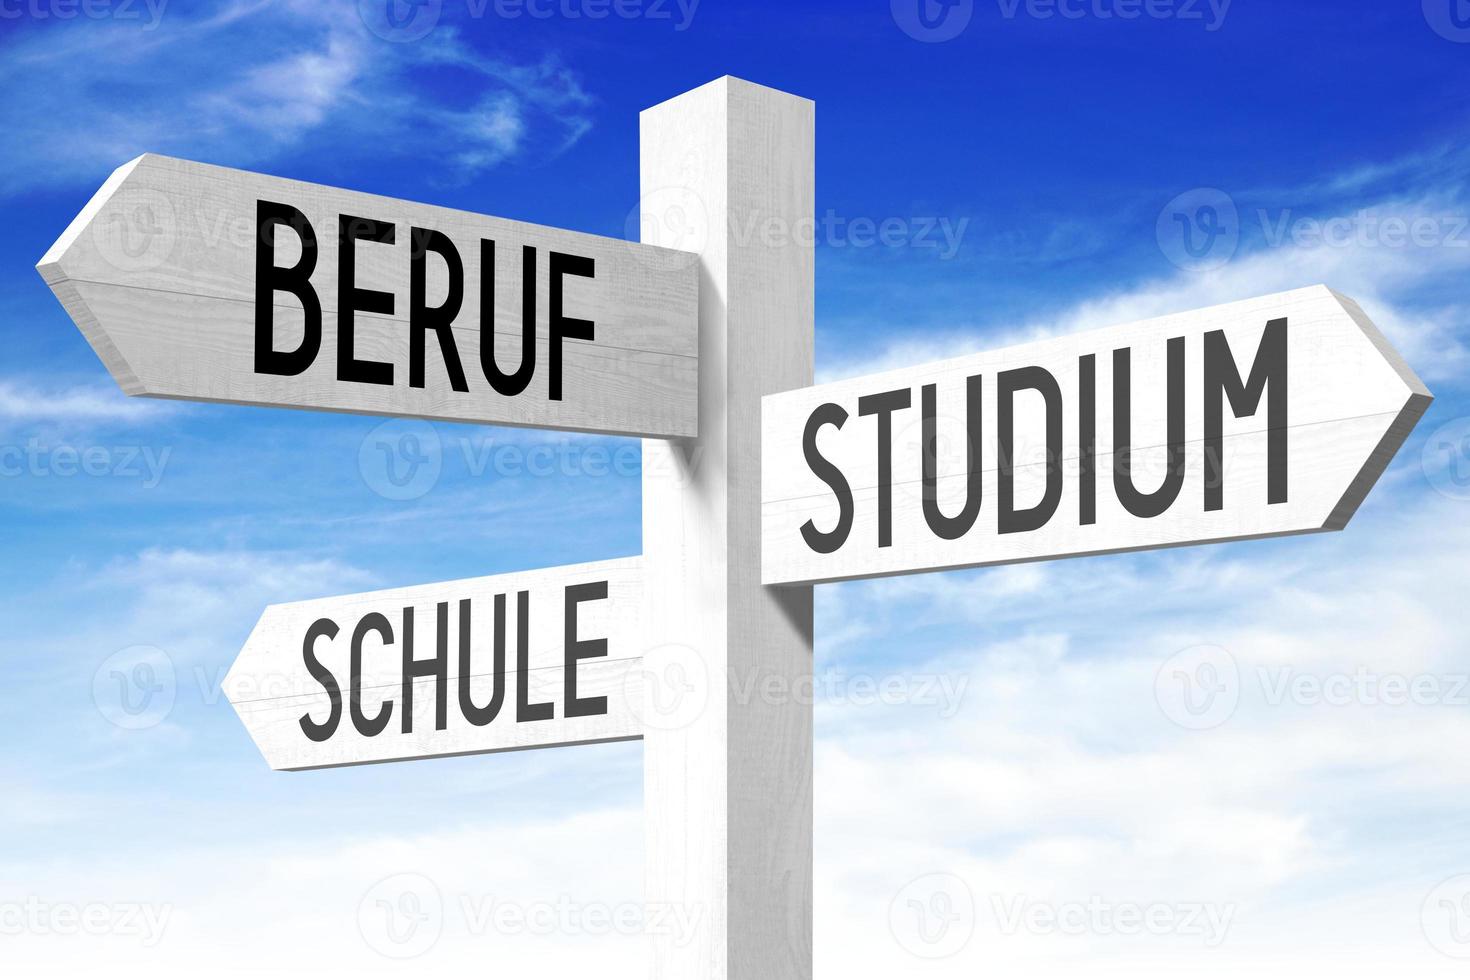 Profession, Studies, School in German - Wooden Signpost with Three Arrows and Sky in Background photo